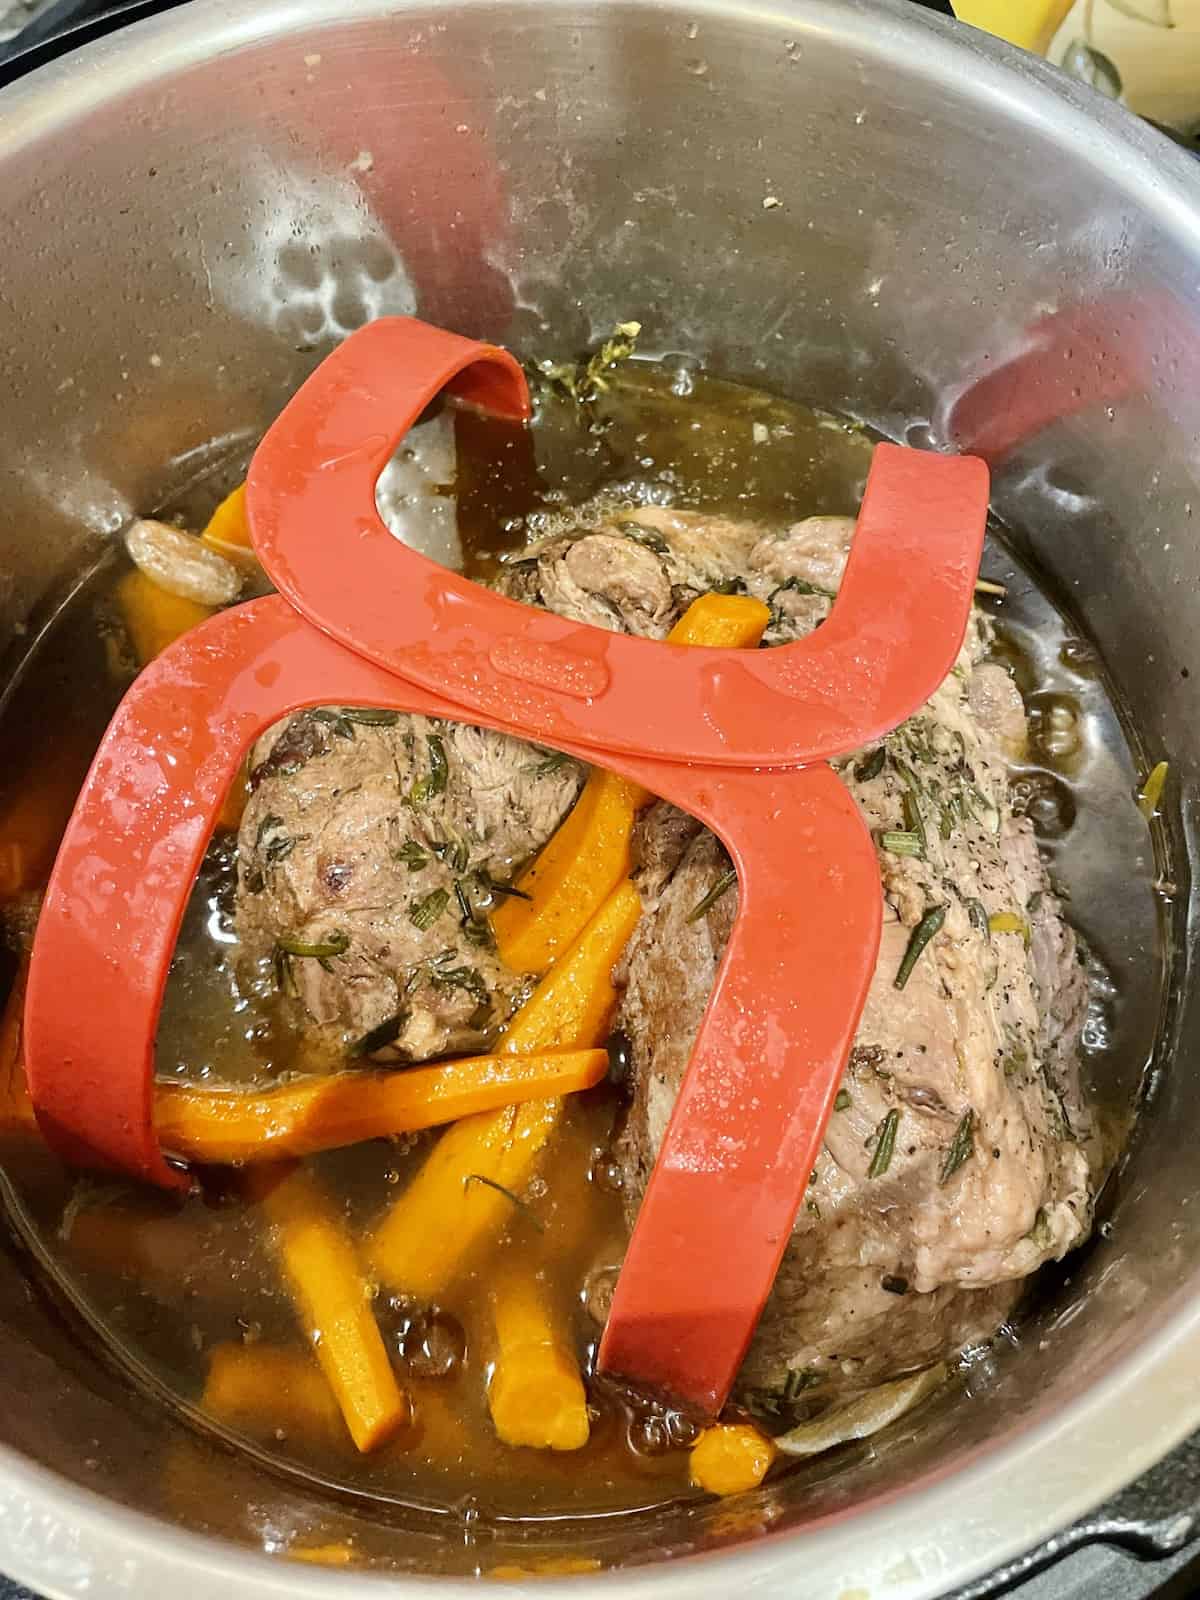 pressure cooked leg of lamb roast and carrots on a sling in the inner pot